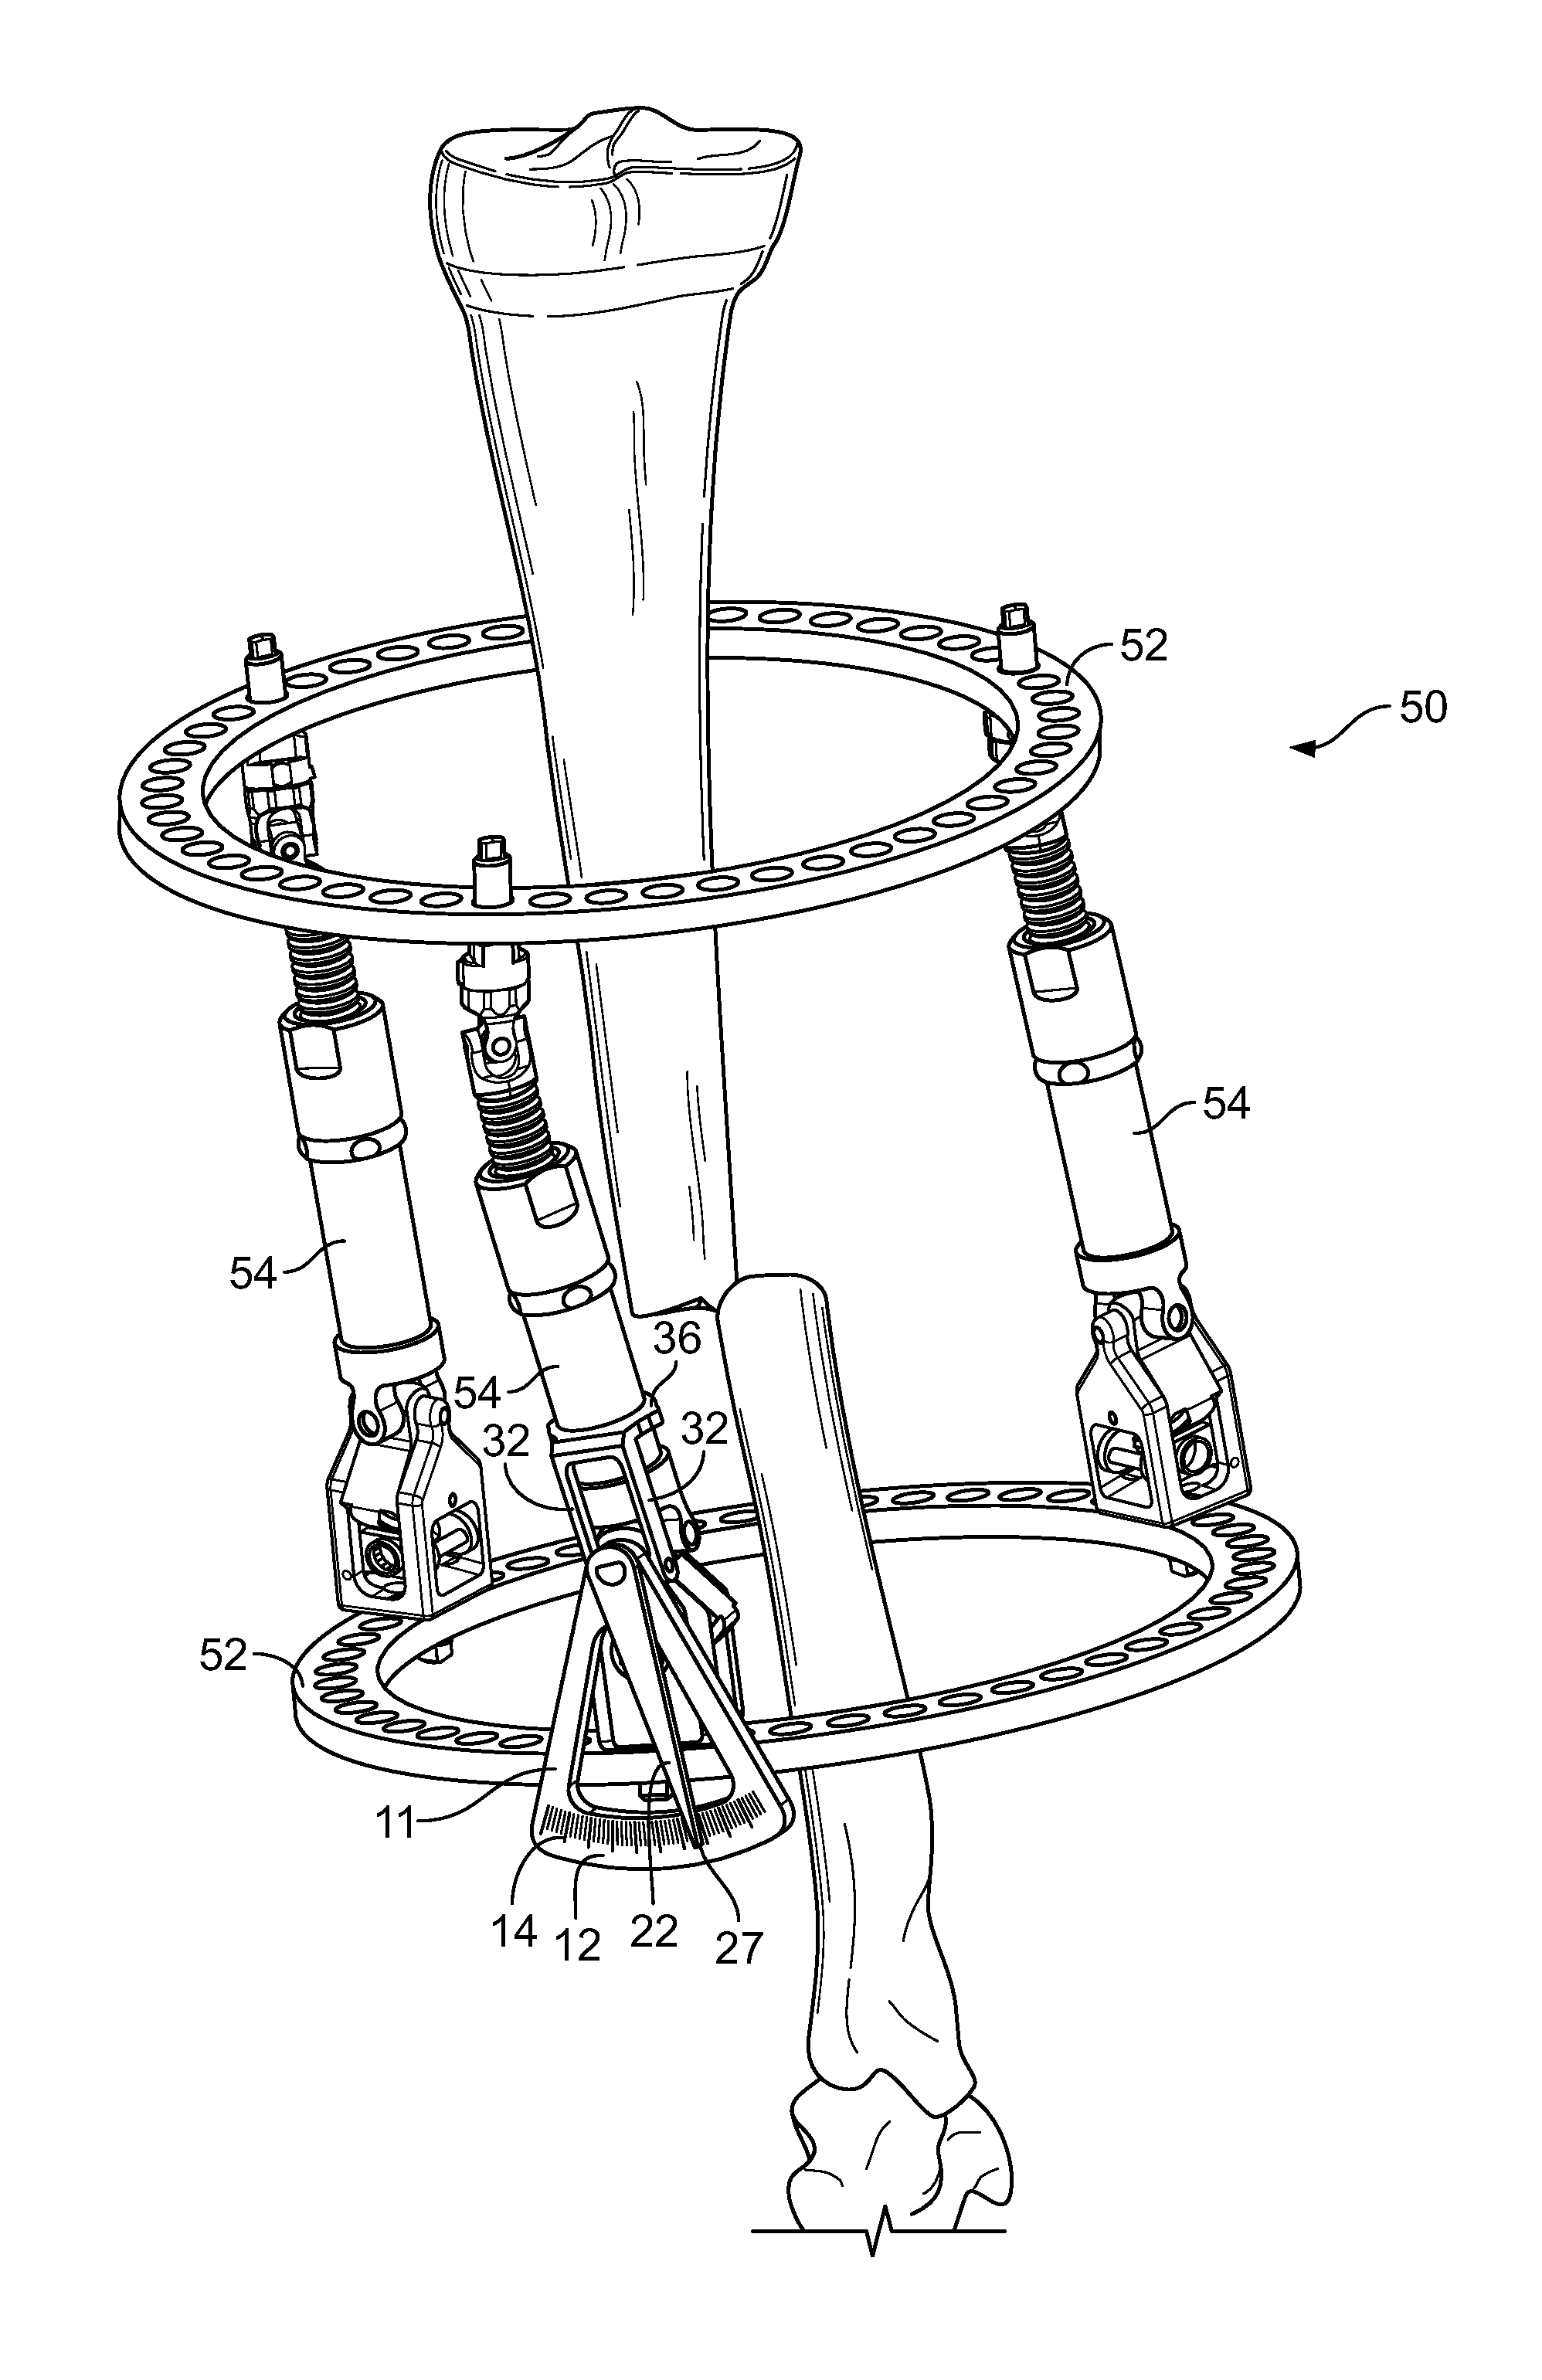 Measurement device for external fixation frame